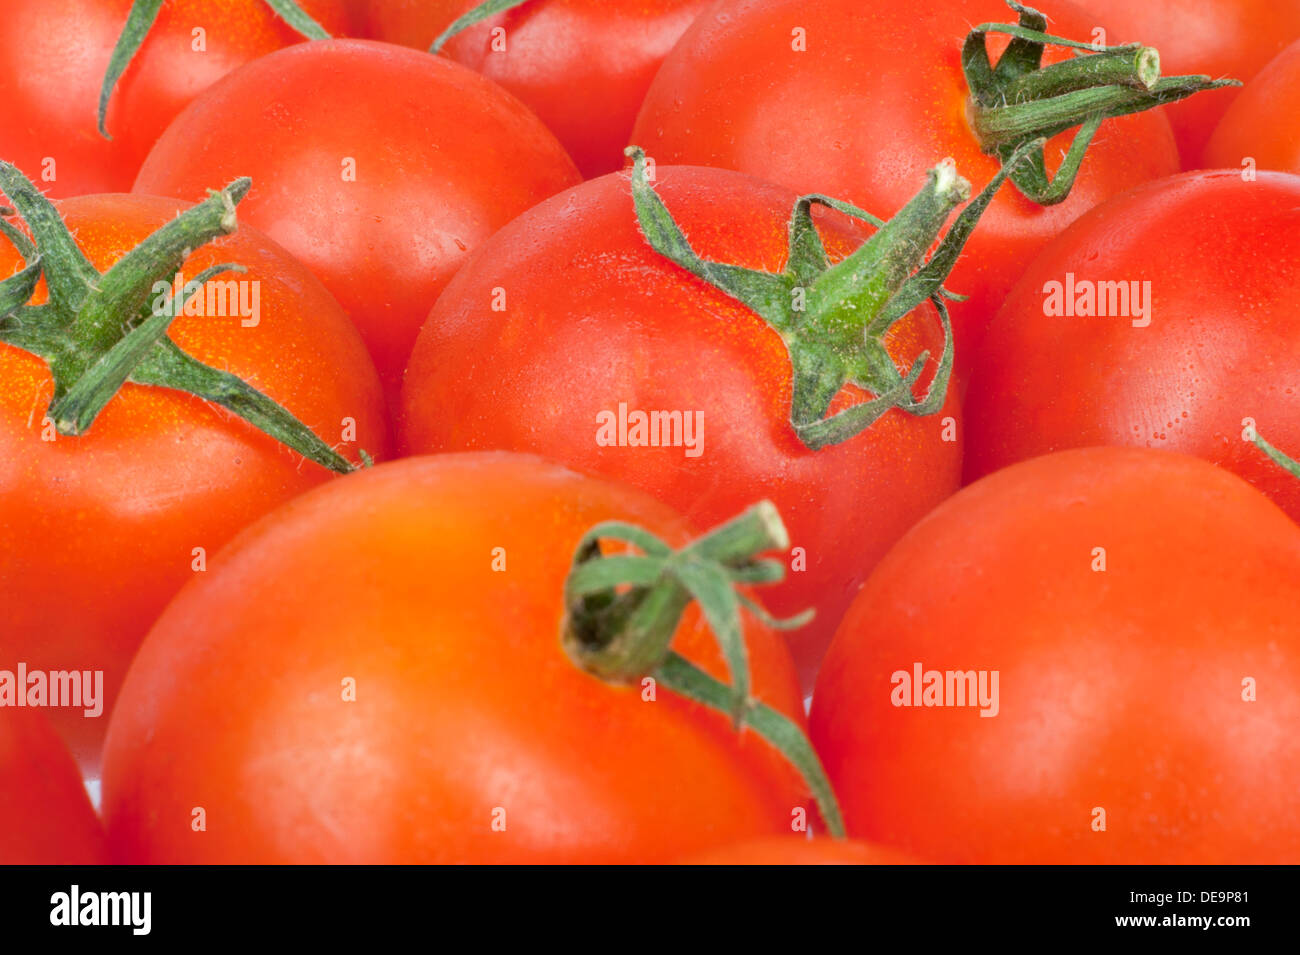 Contiguous background texture of red juicy fresh tomatoes in close up Stock Photo